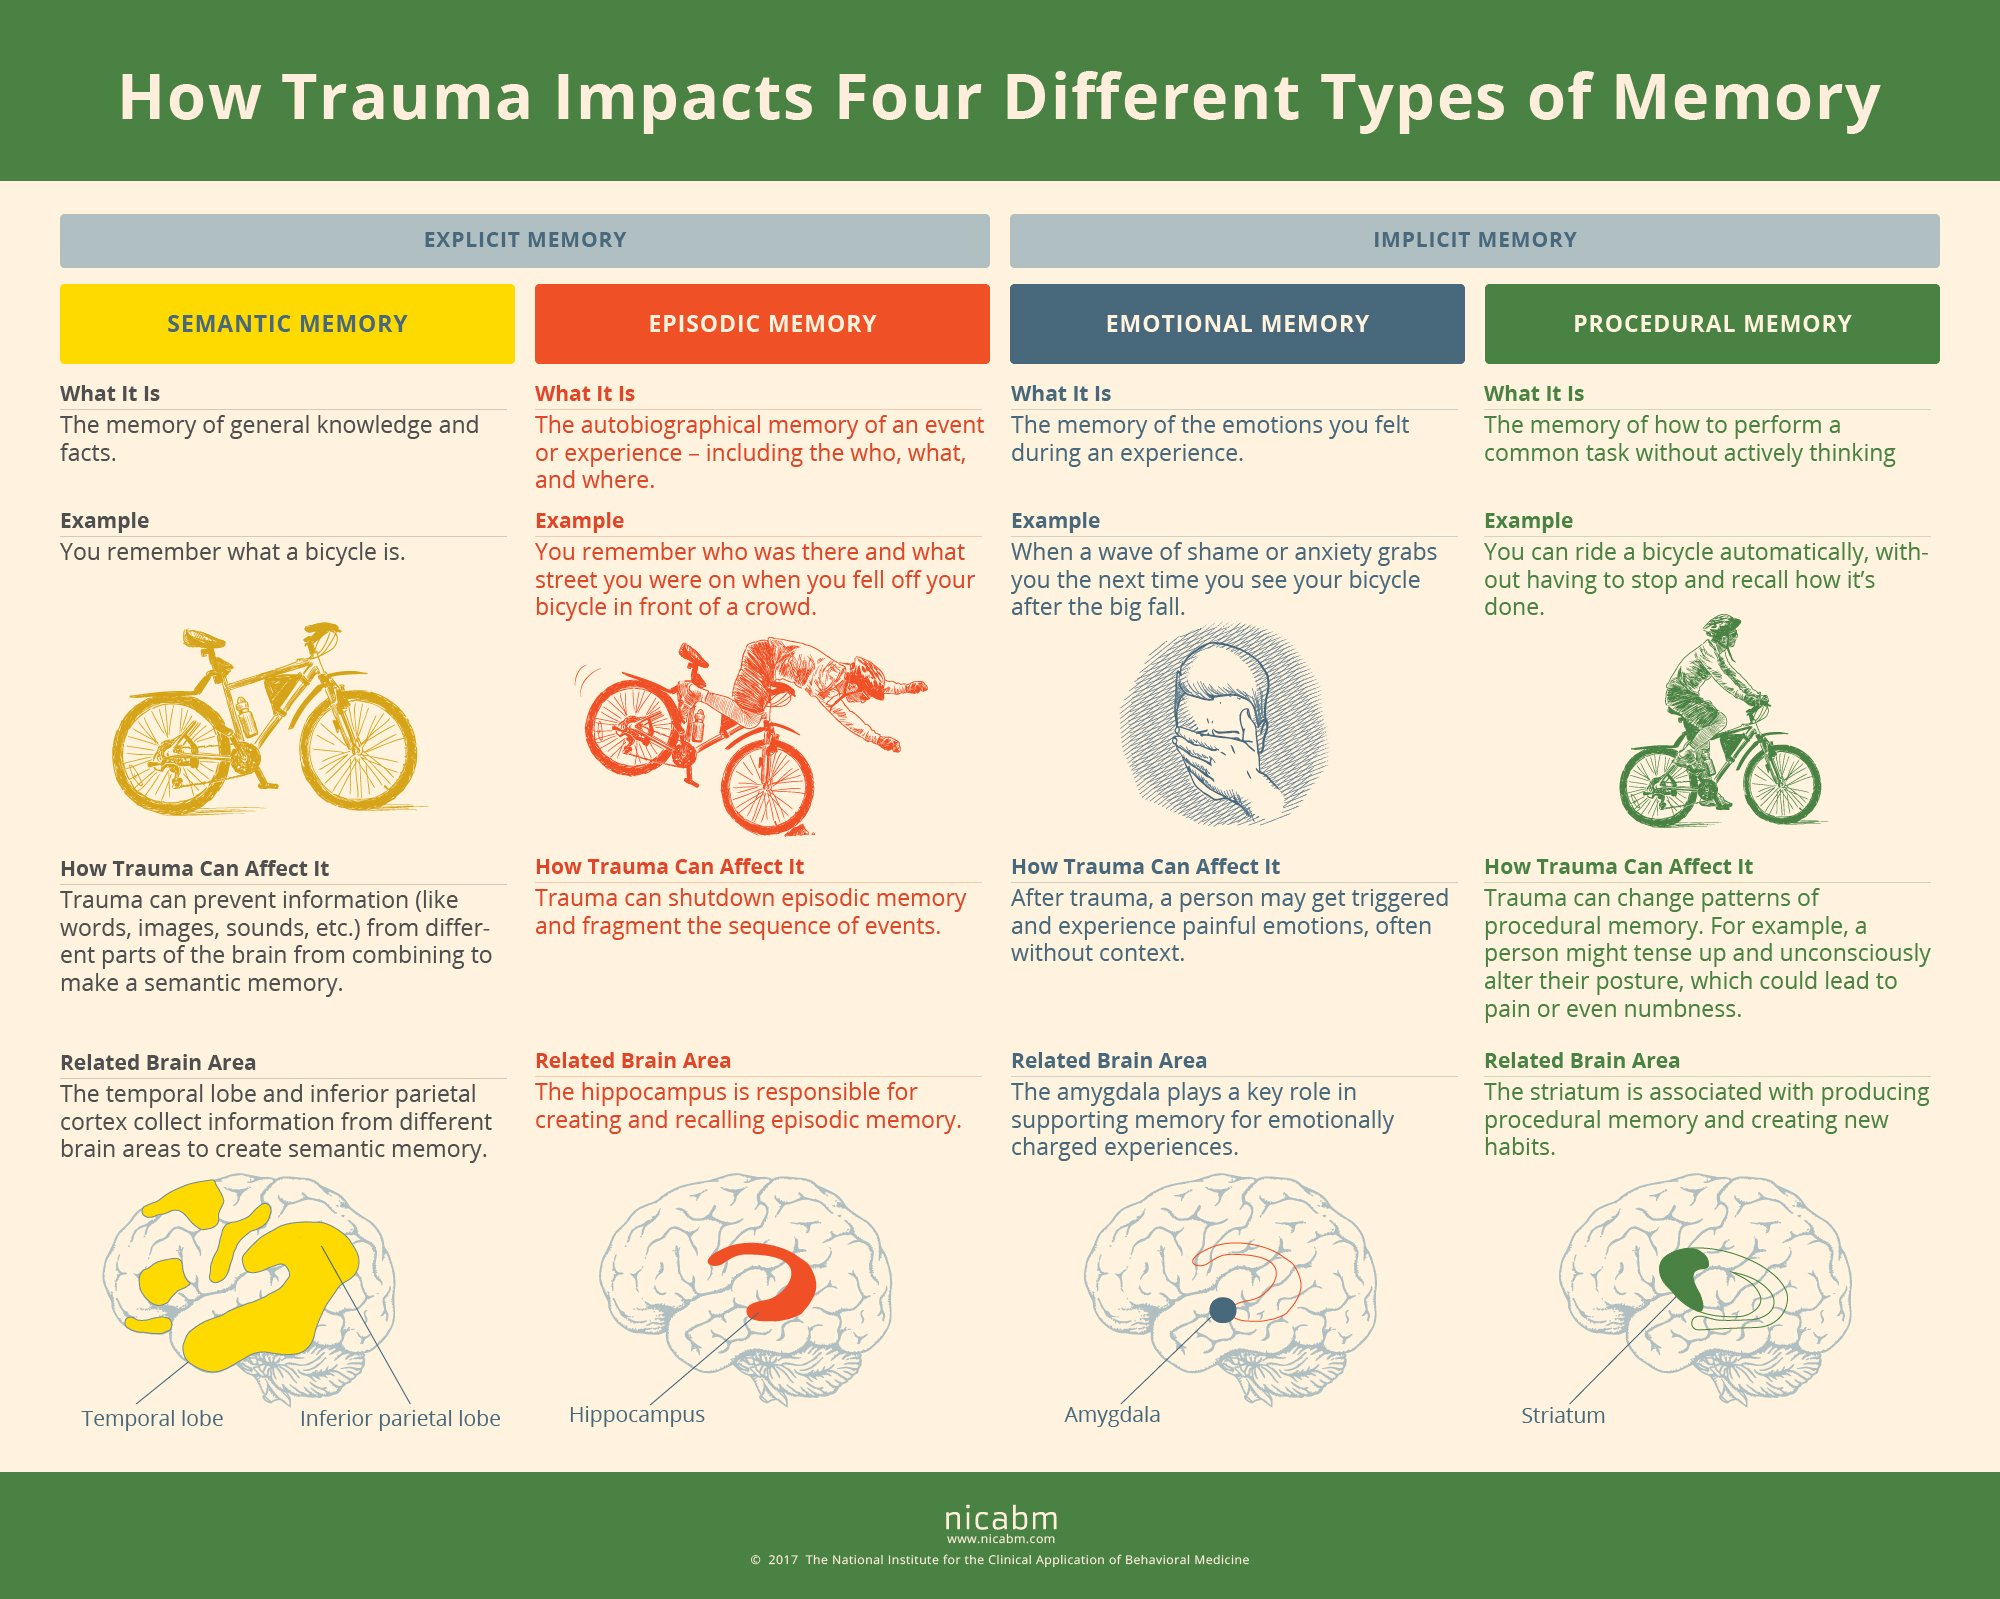 How Trauma Impacts the Brain and the 4 Types of Memory